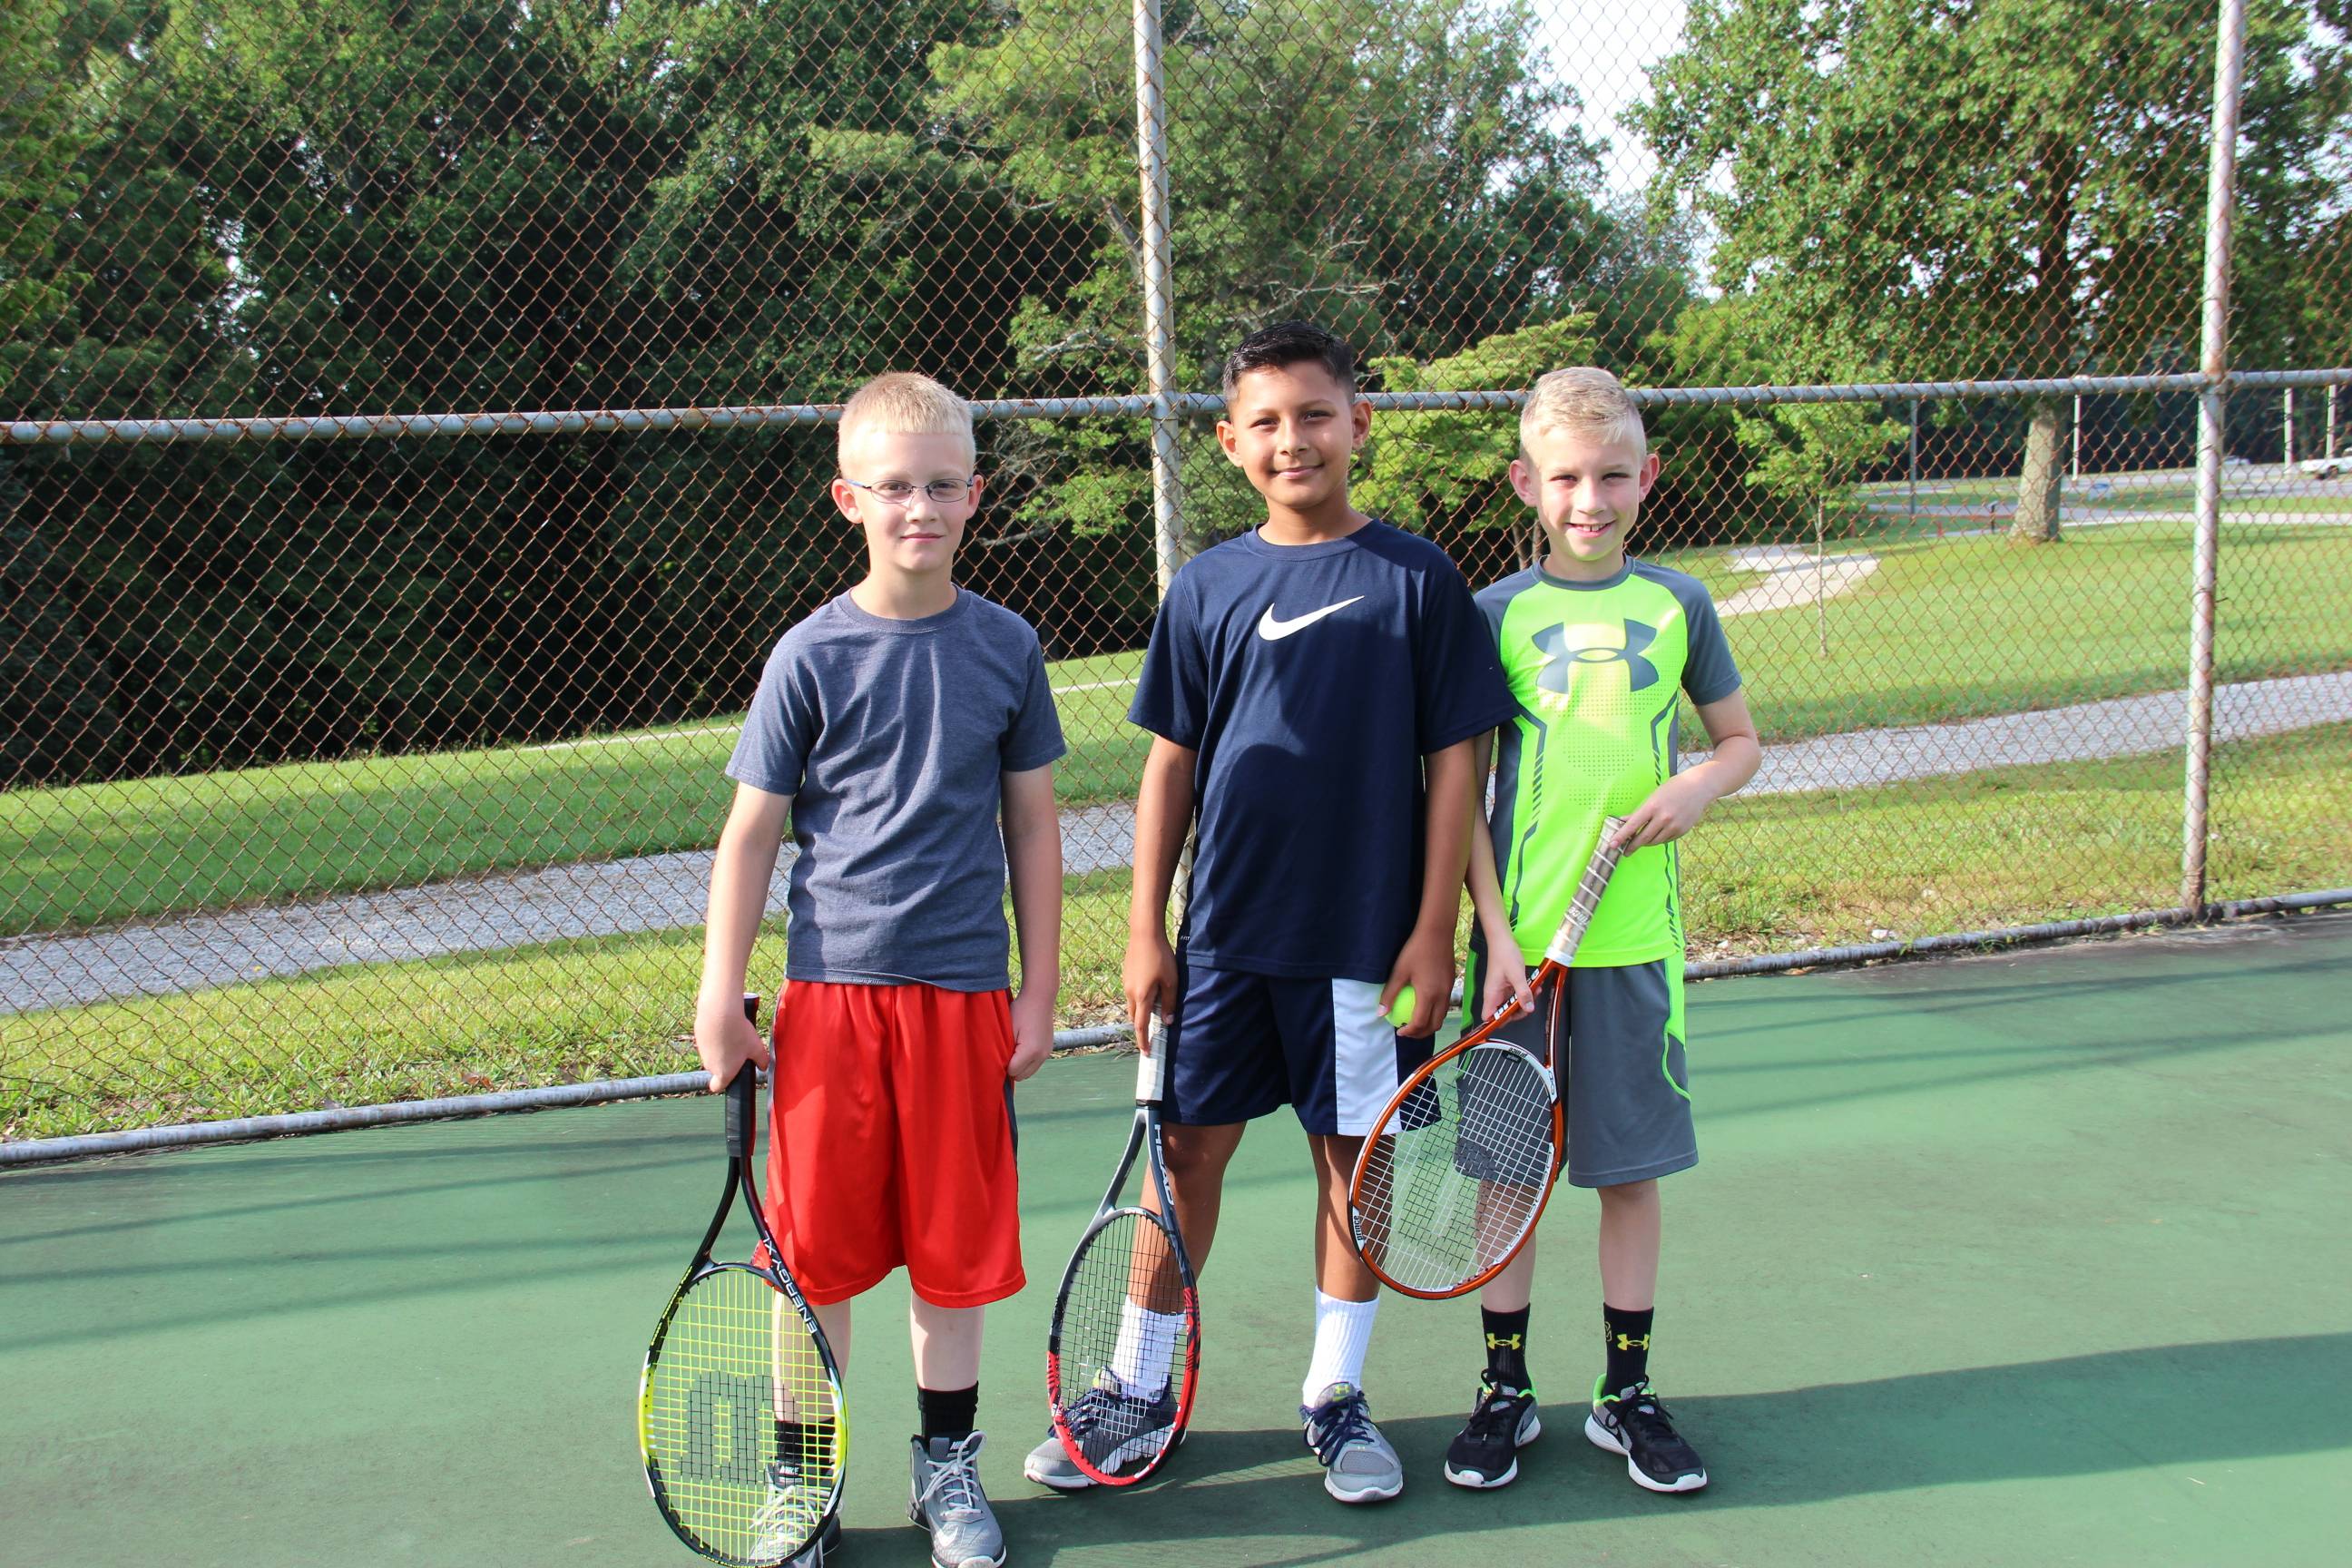 group of boys on tennis field